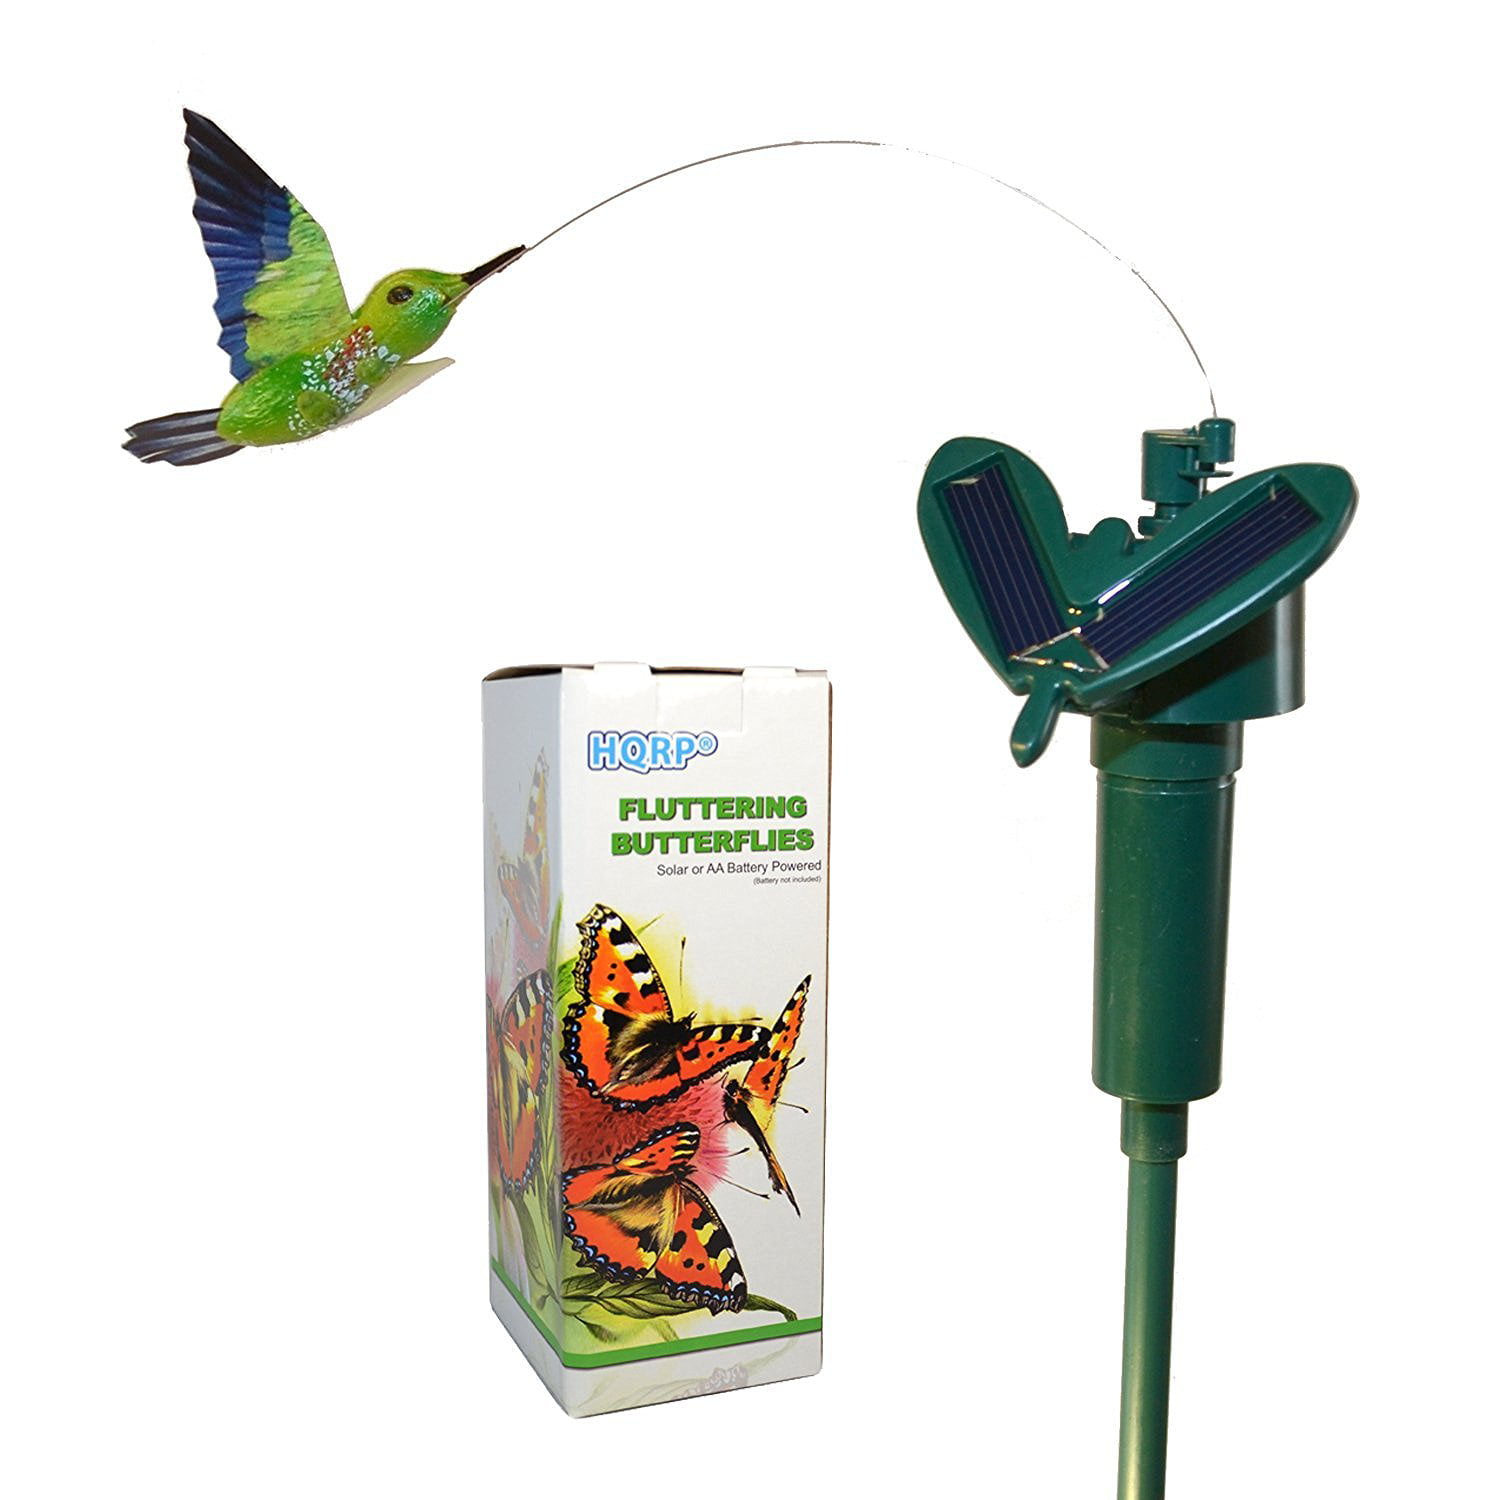 iLory Pack of 2 Solar and Battery Powered Flying Wobble Fluttering Hummingbird for Patio Garden Yard Stake Plants Flowers Wedding Outdoor Decor Random Color